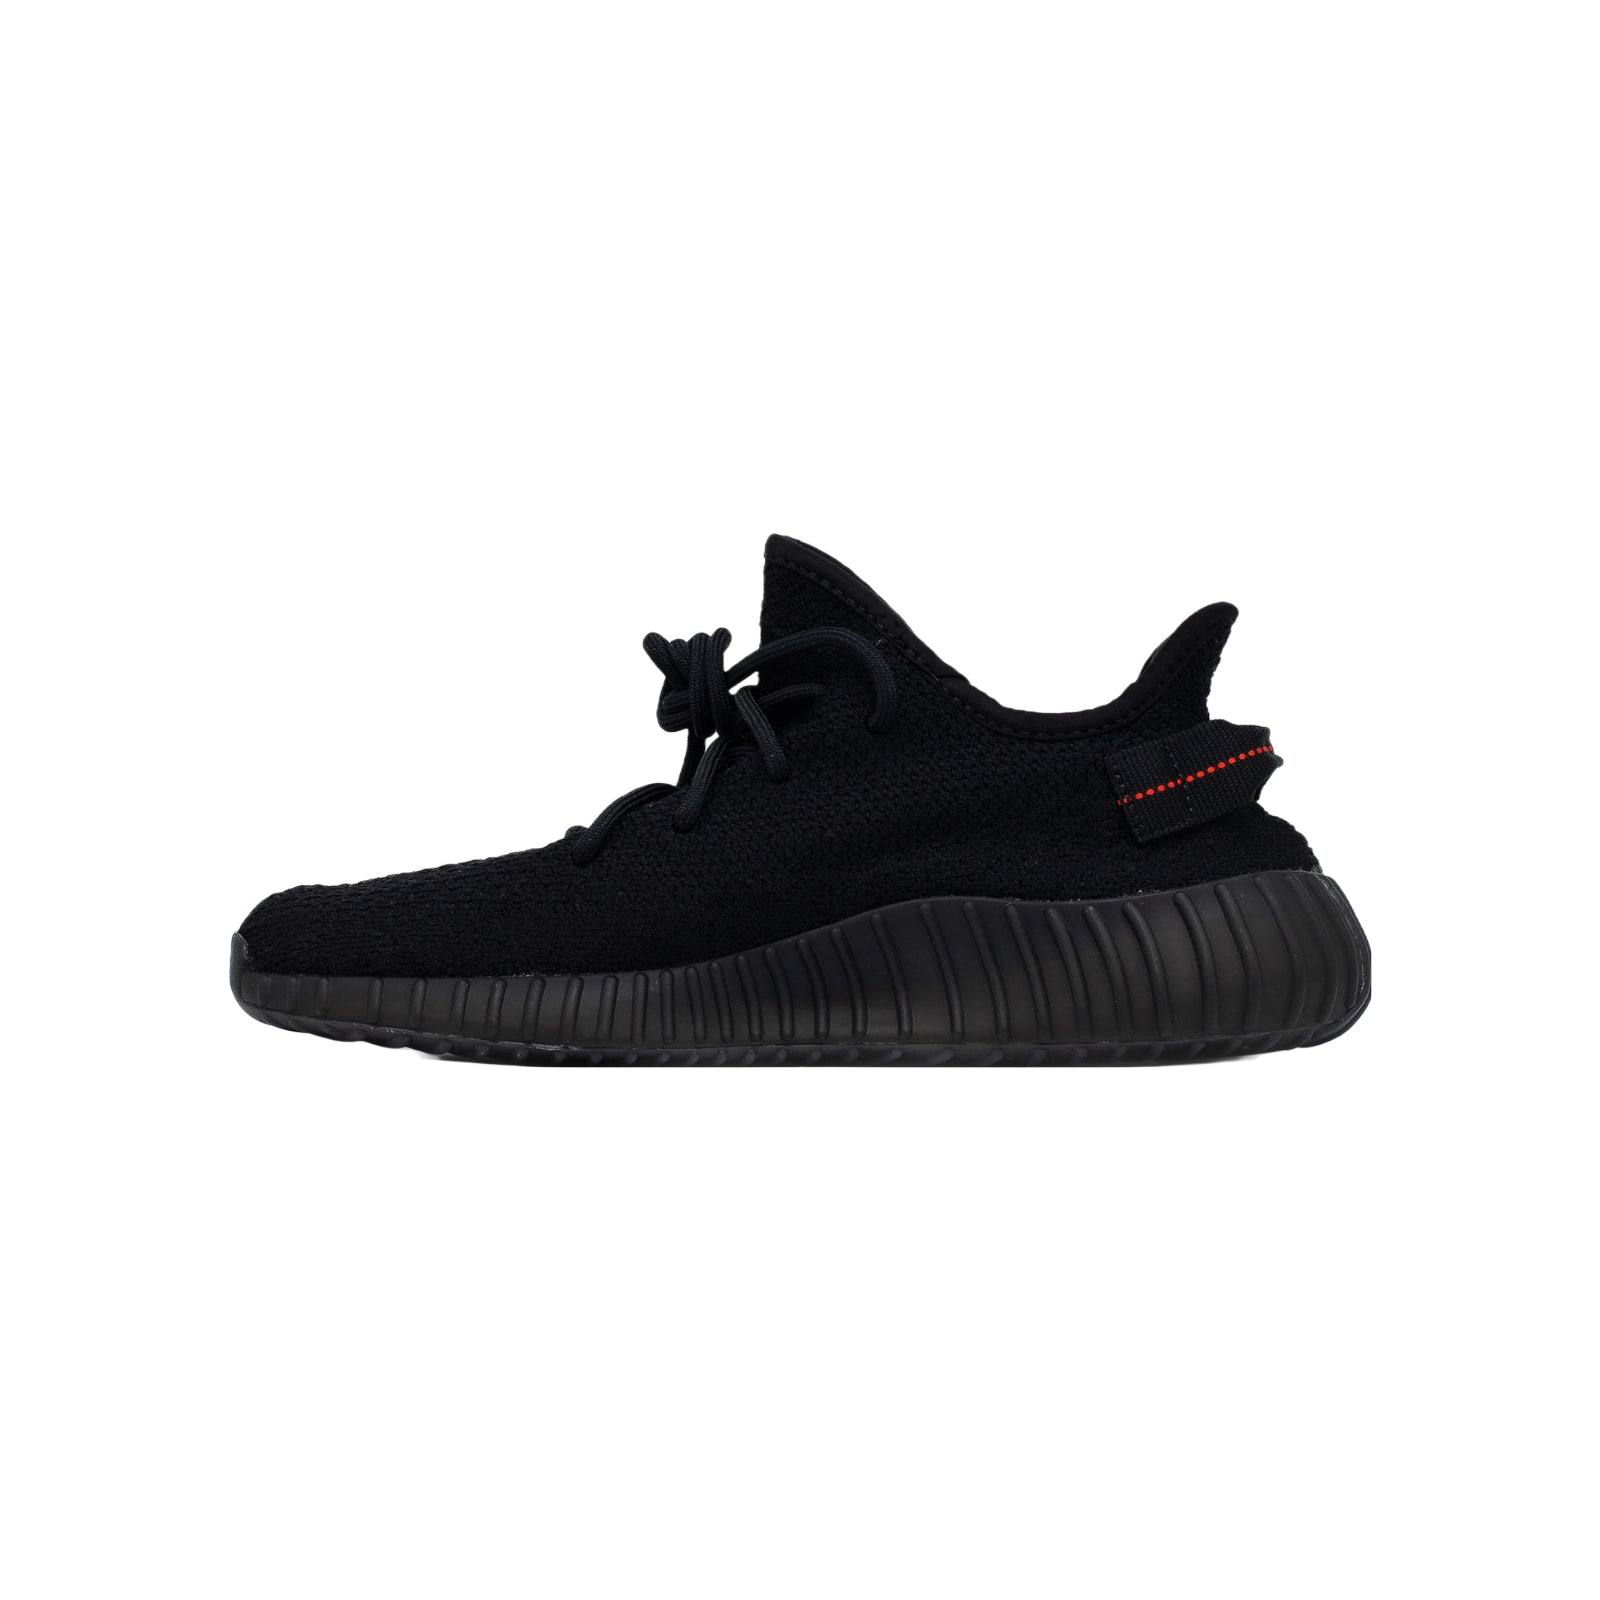 Yeezy the Boost 350 V2, Bred